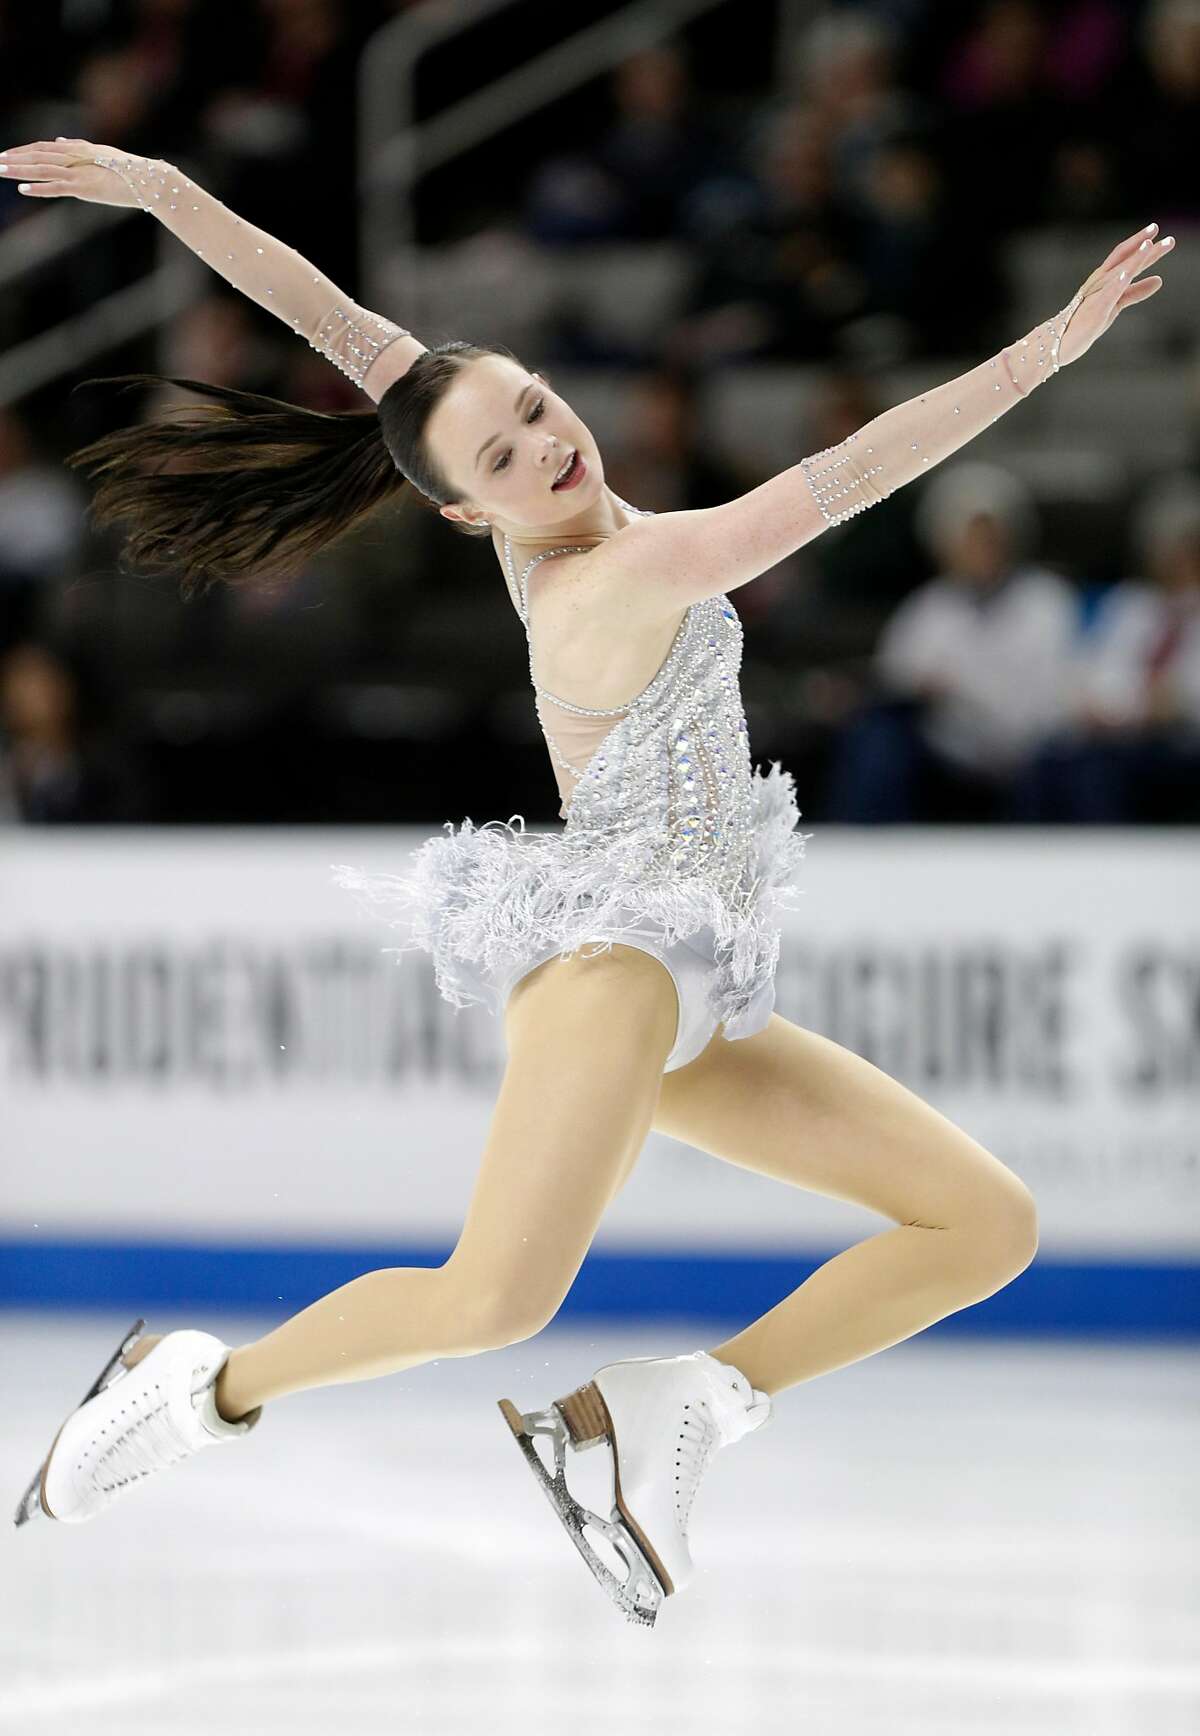 Teen from SF's Tenderloin snags silver at U.S. Figure Skating Championships